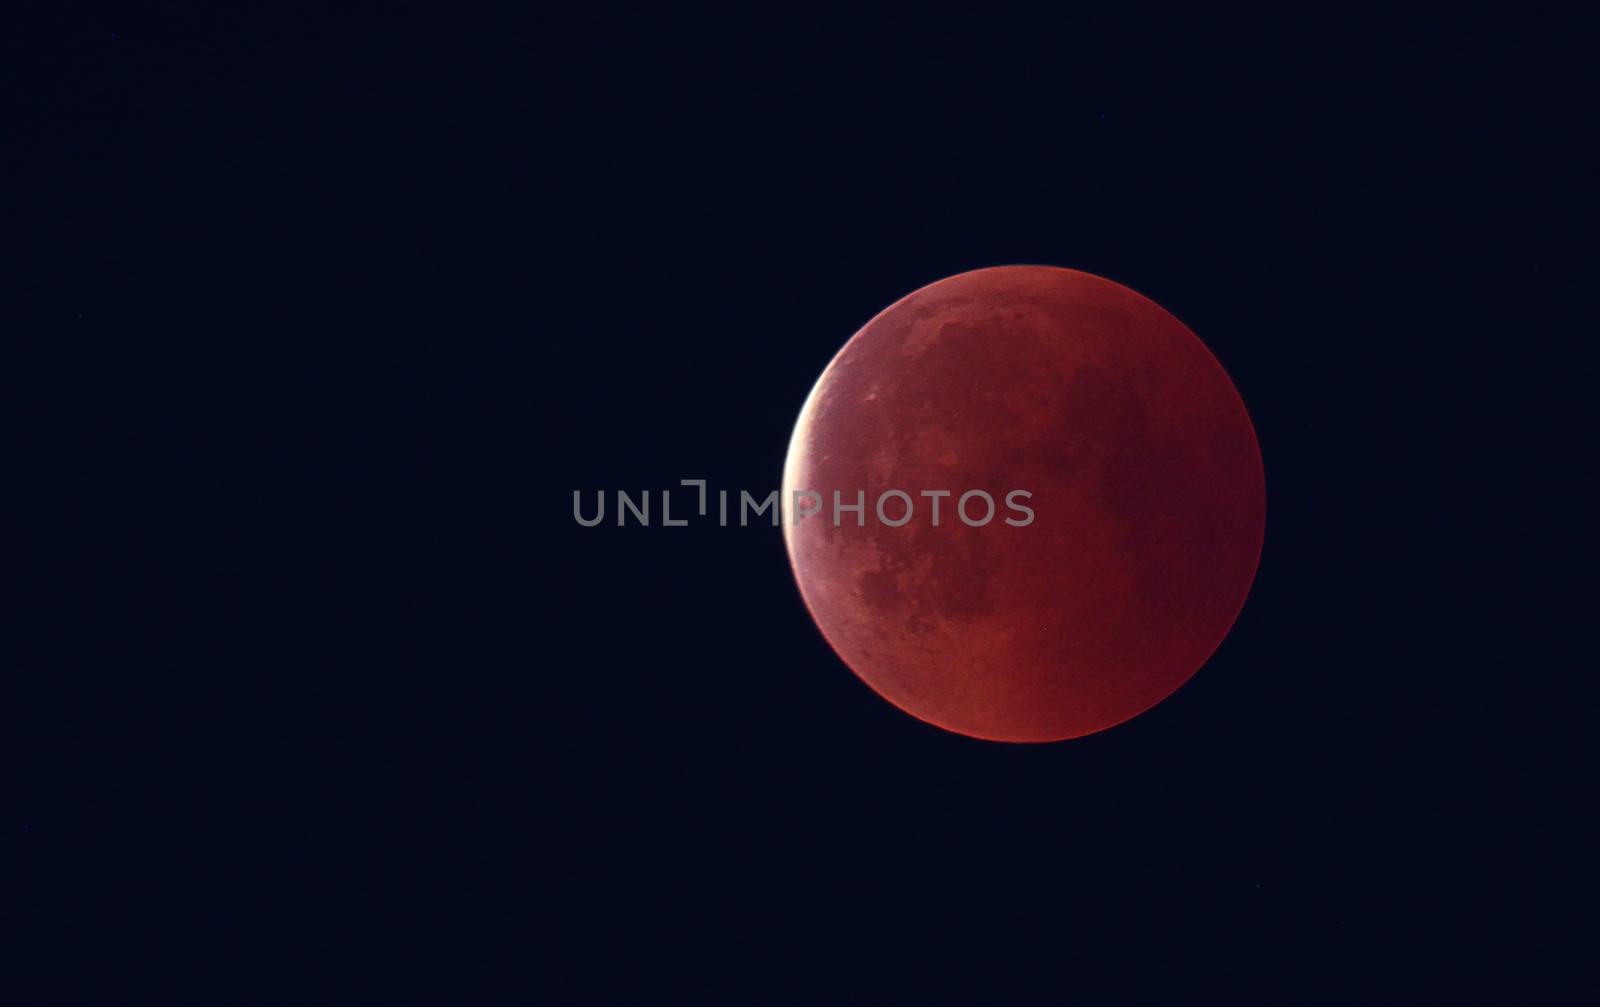 A full moon turned red during moon eclipse in July 27th 2018.